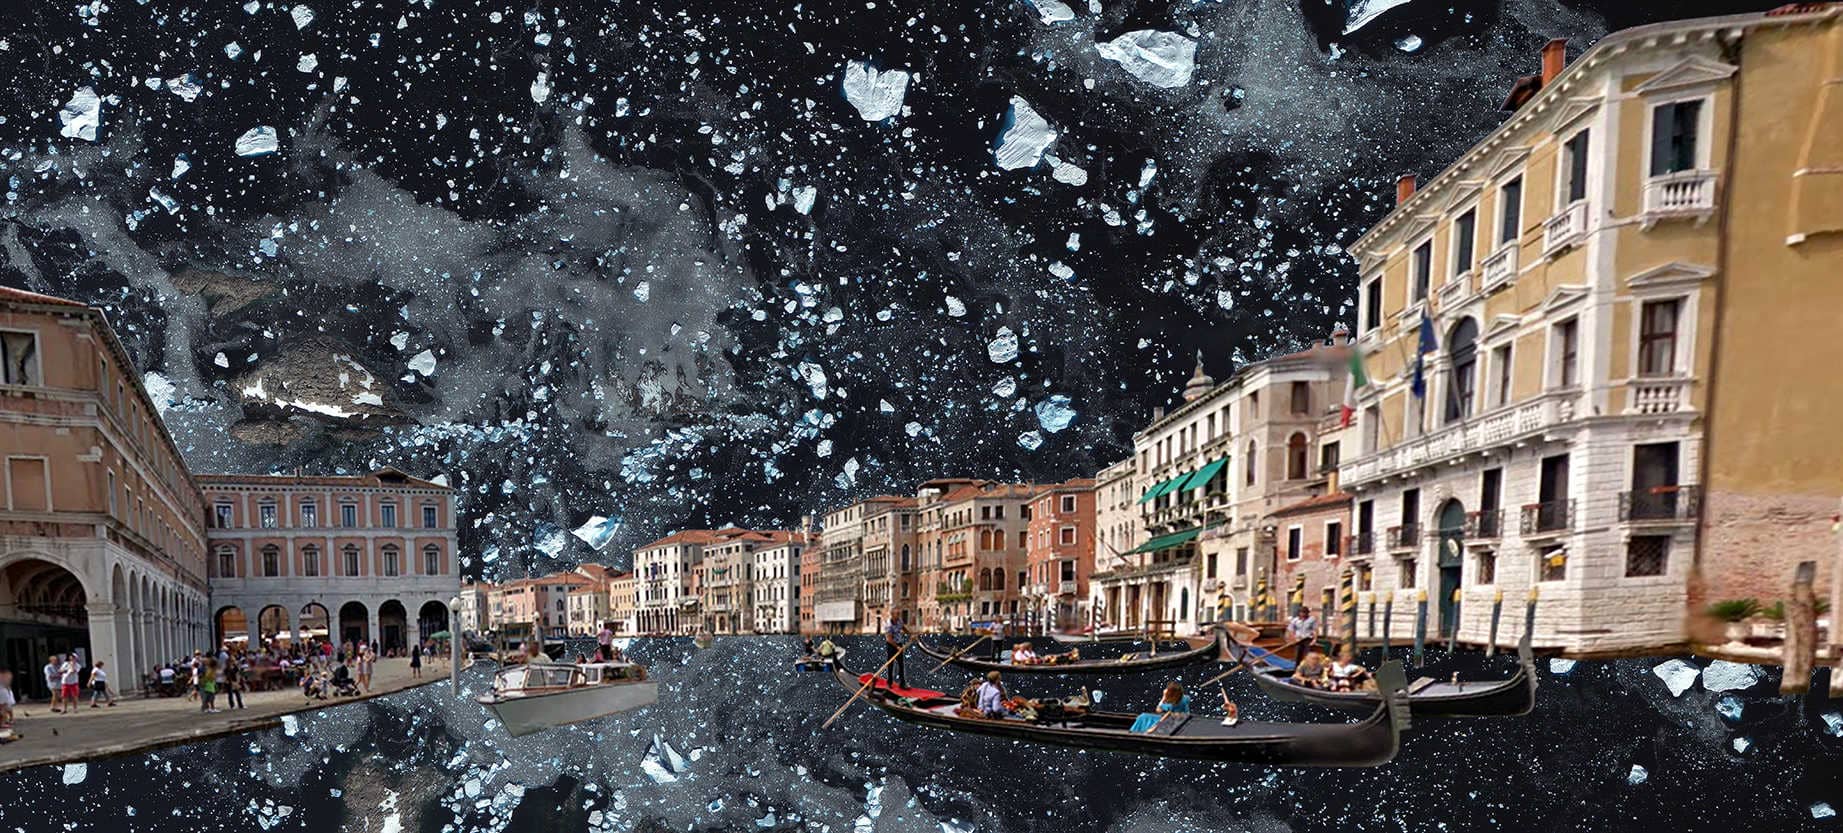 ICE-SPACE VENICE, 2015, 2 levels, CM 42X75, EDITION of 9